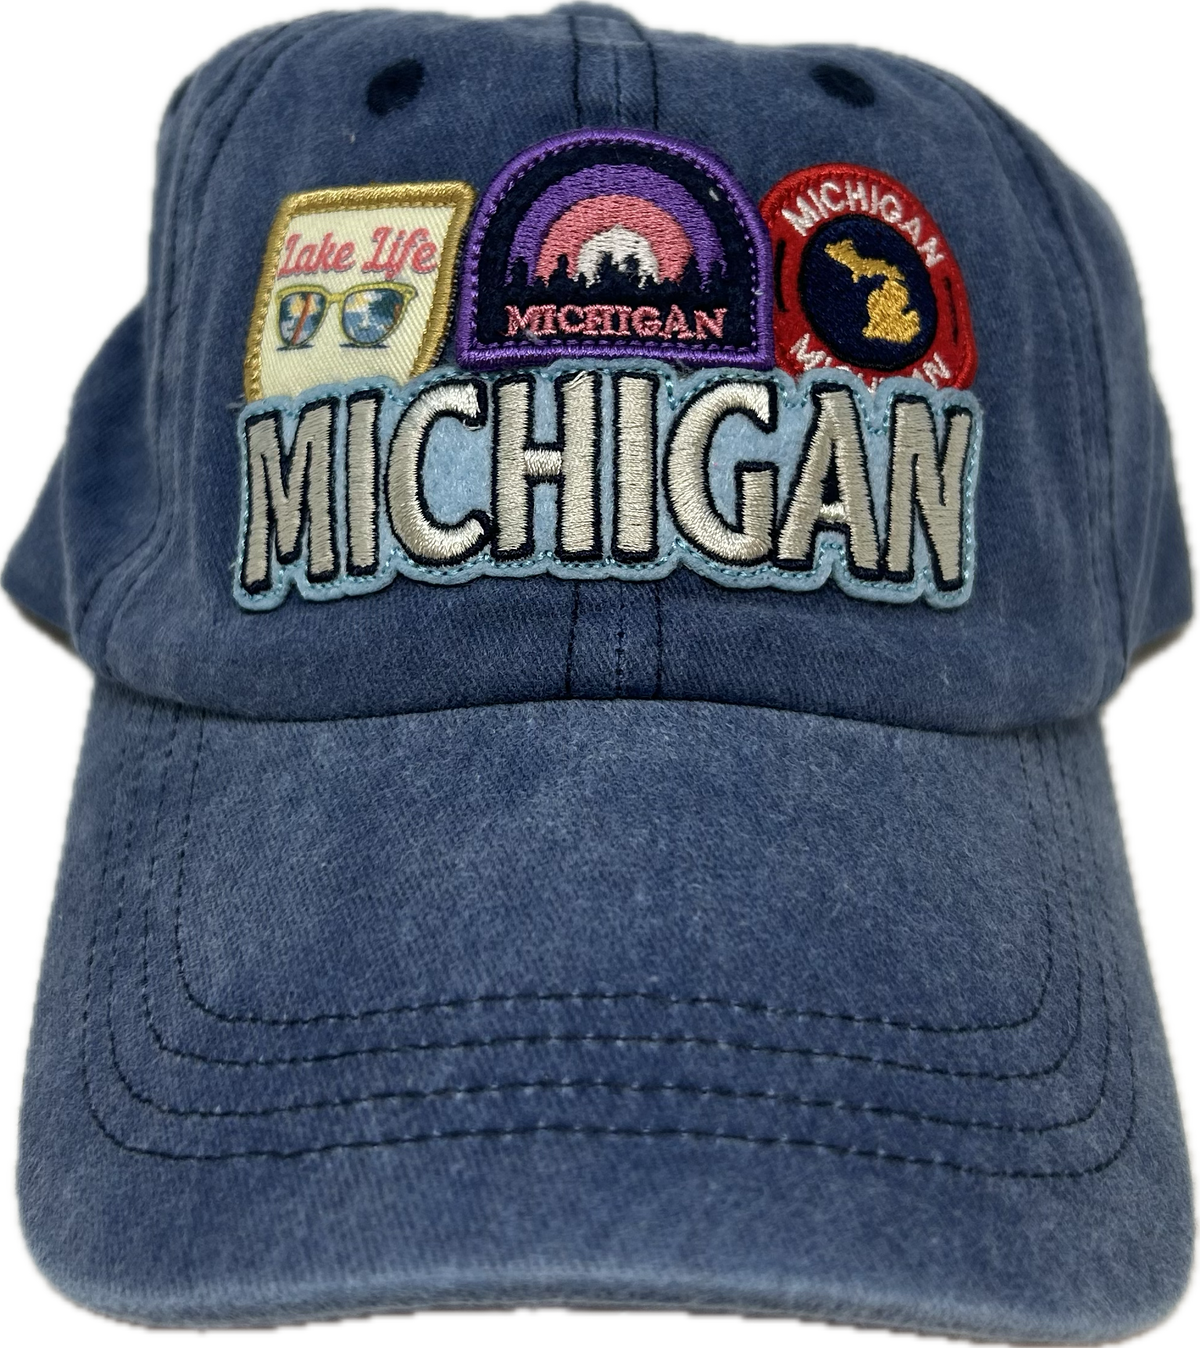 Blue Ball Cap w/Patches